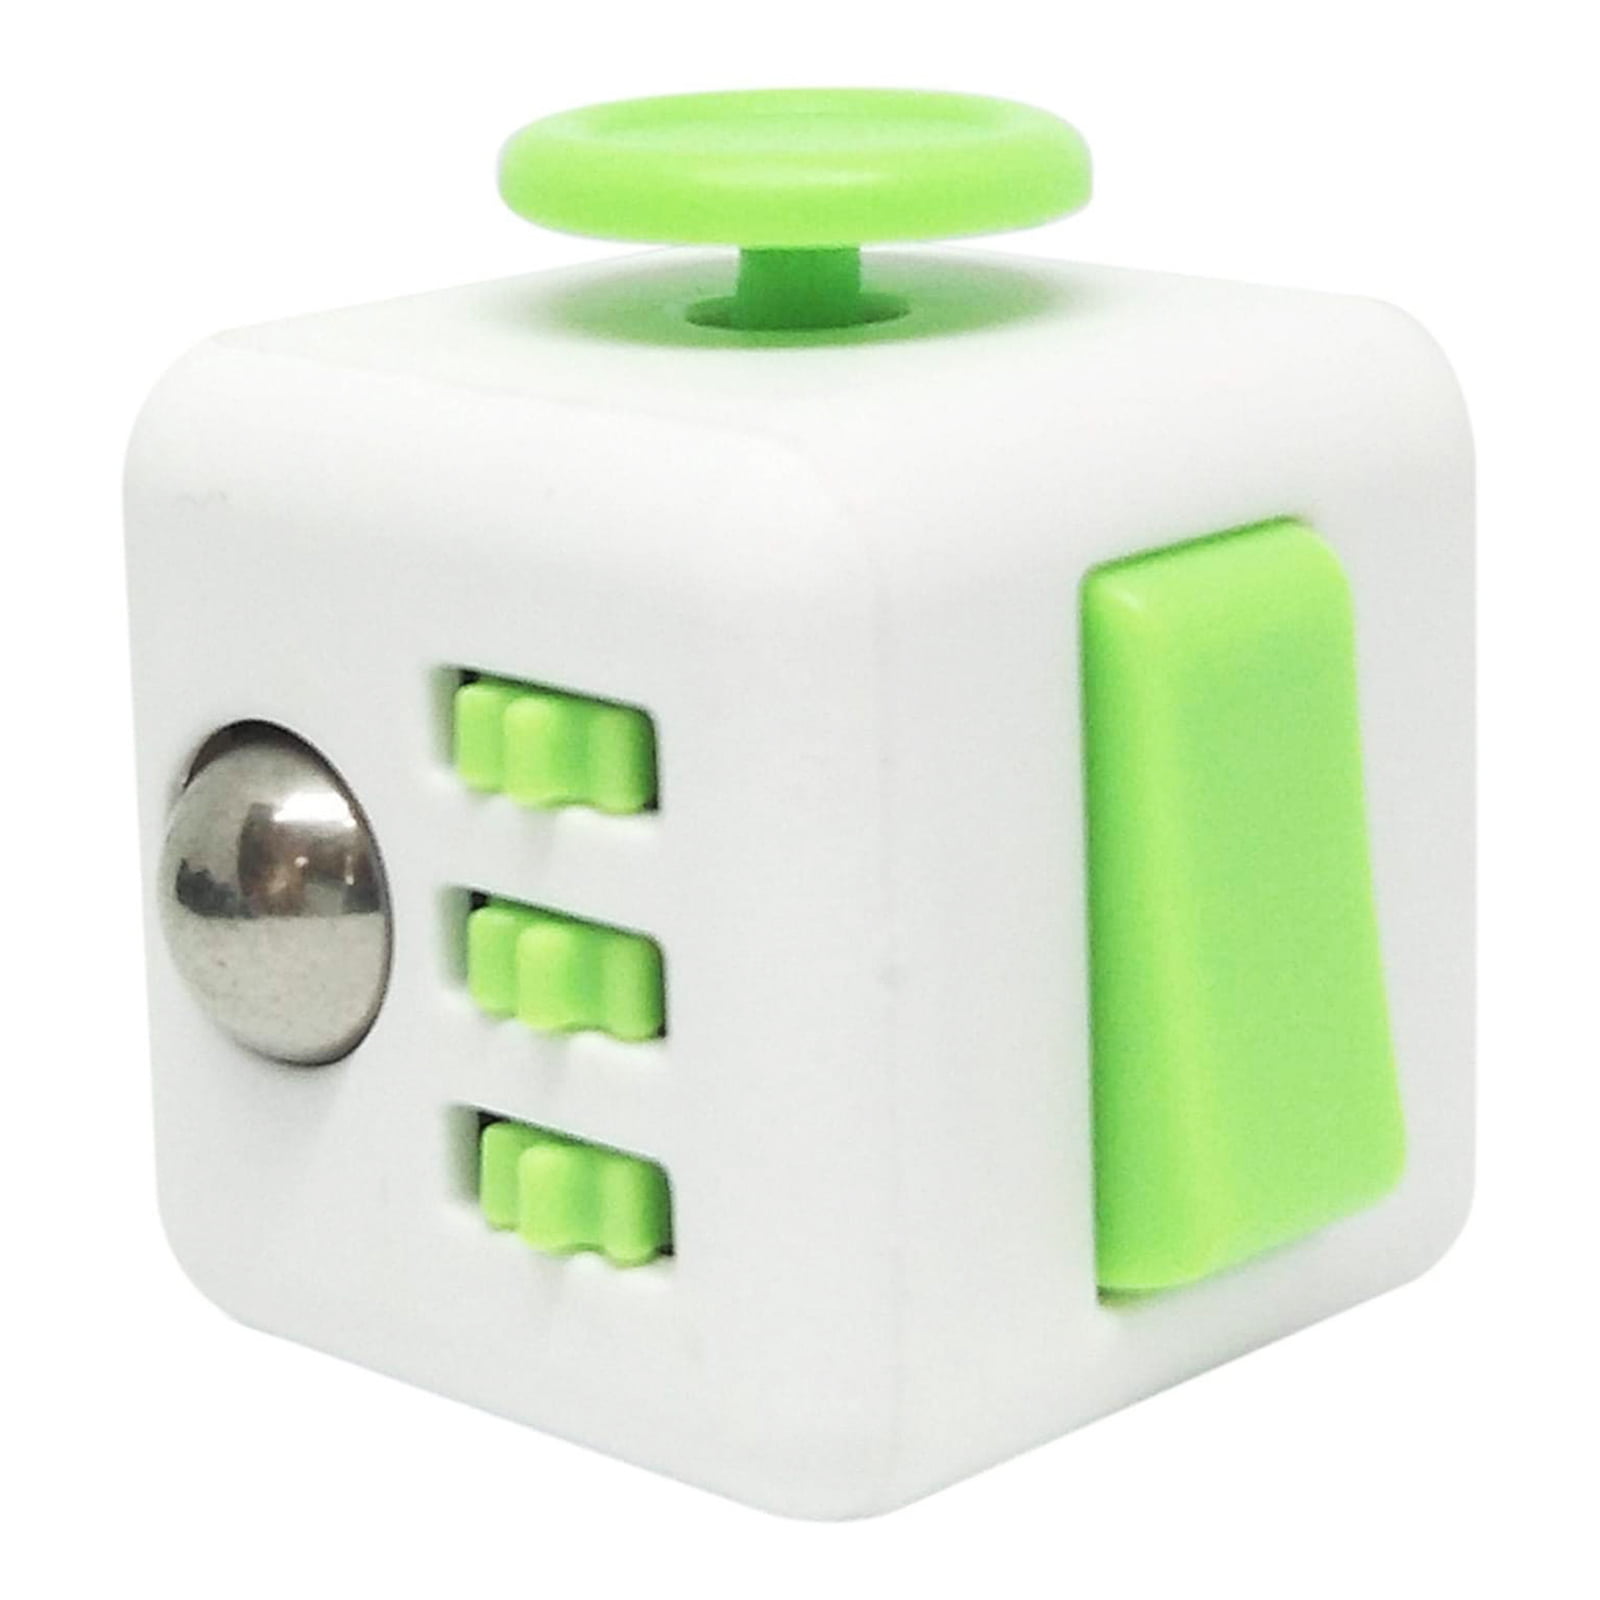 Fidget Anxiety Cube for ADHD Finger Sensory Mini Dice Stress Relief Toy 